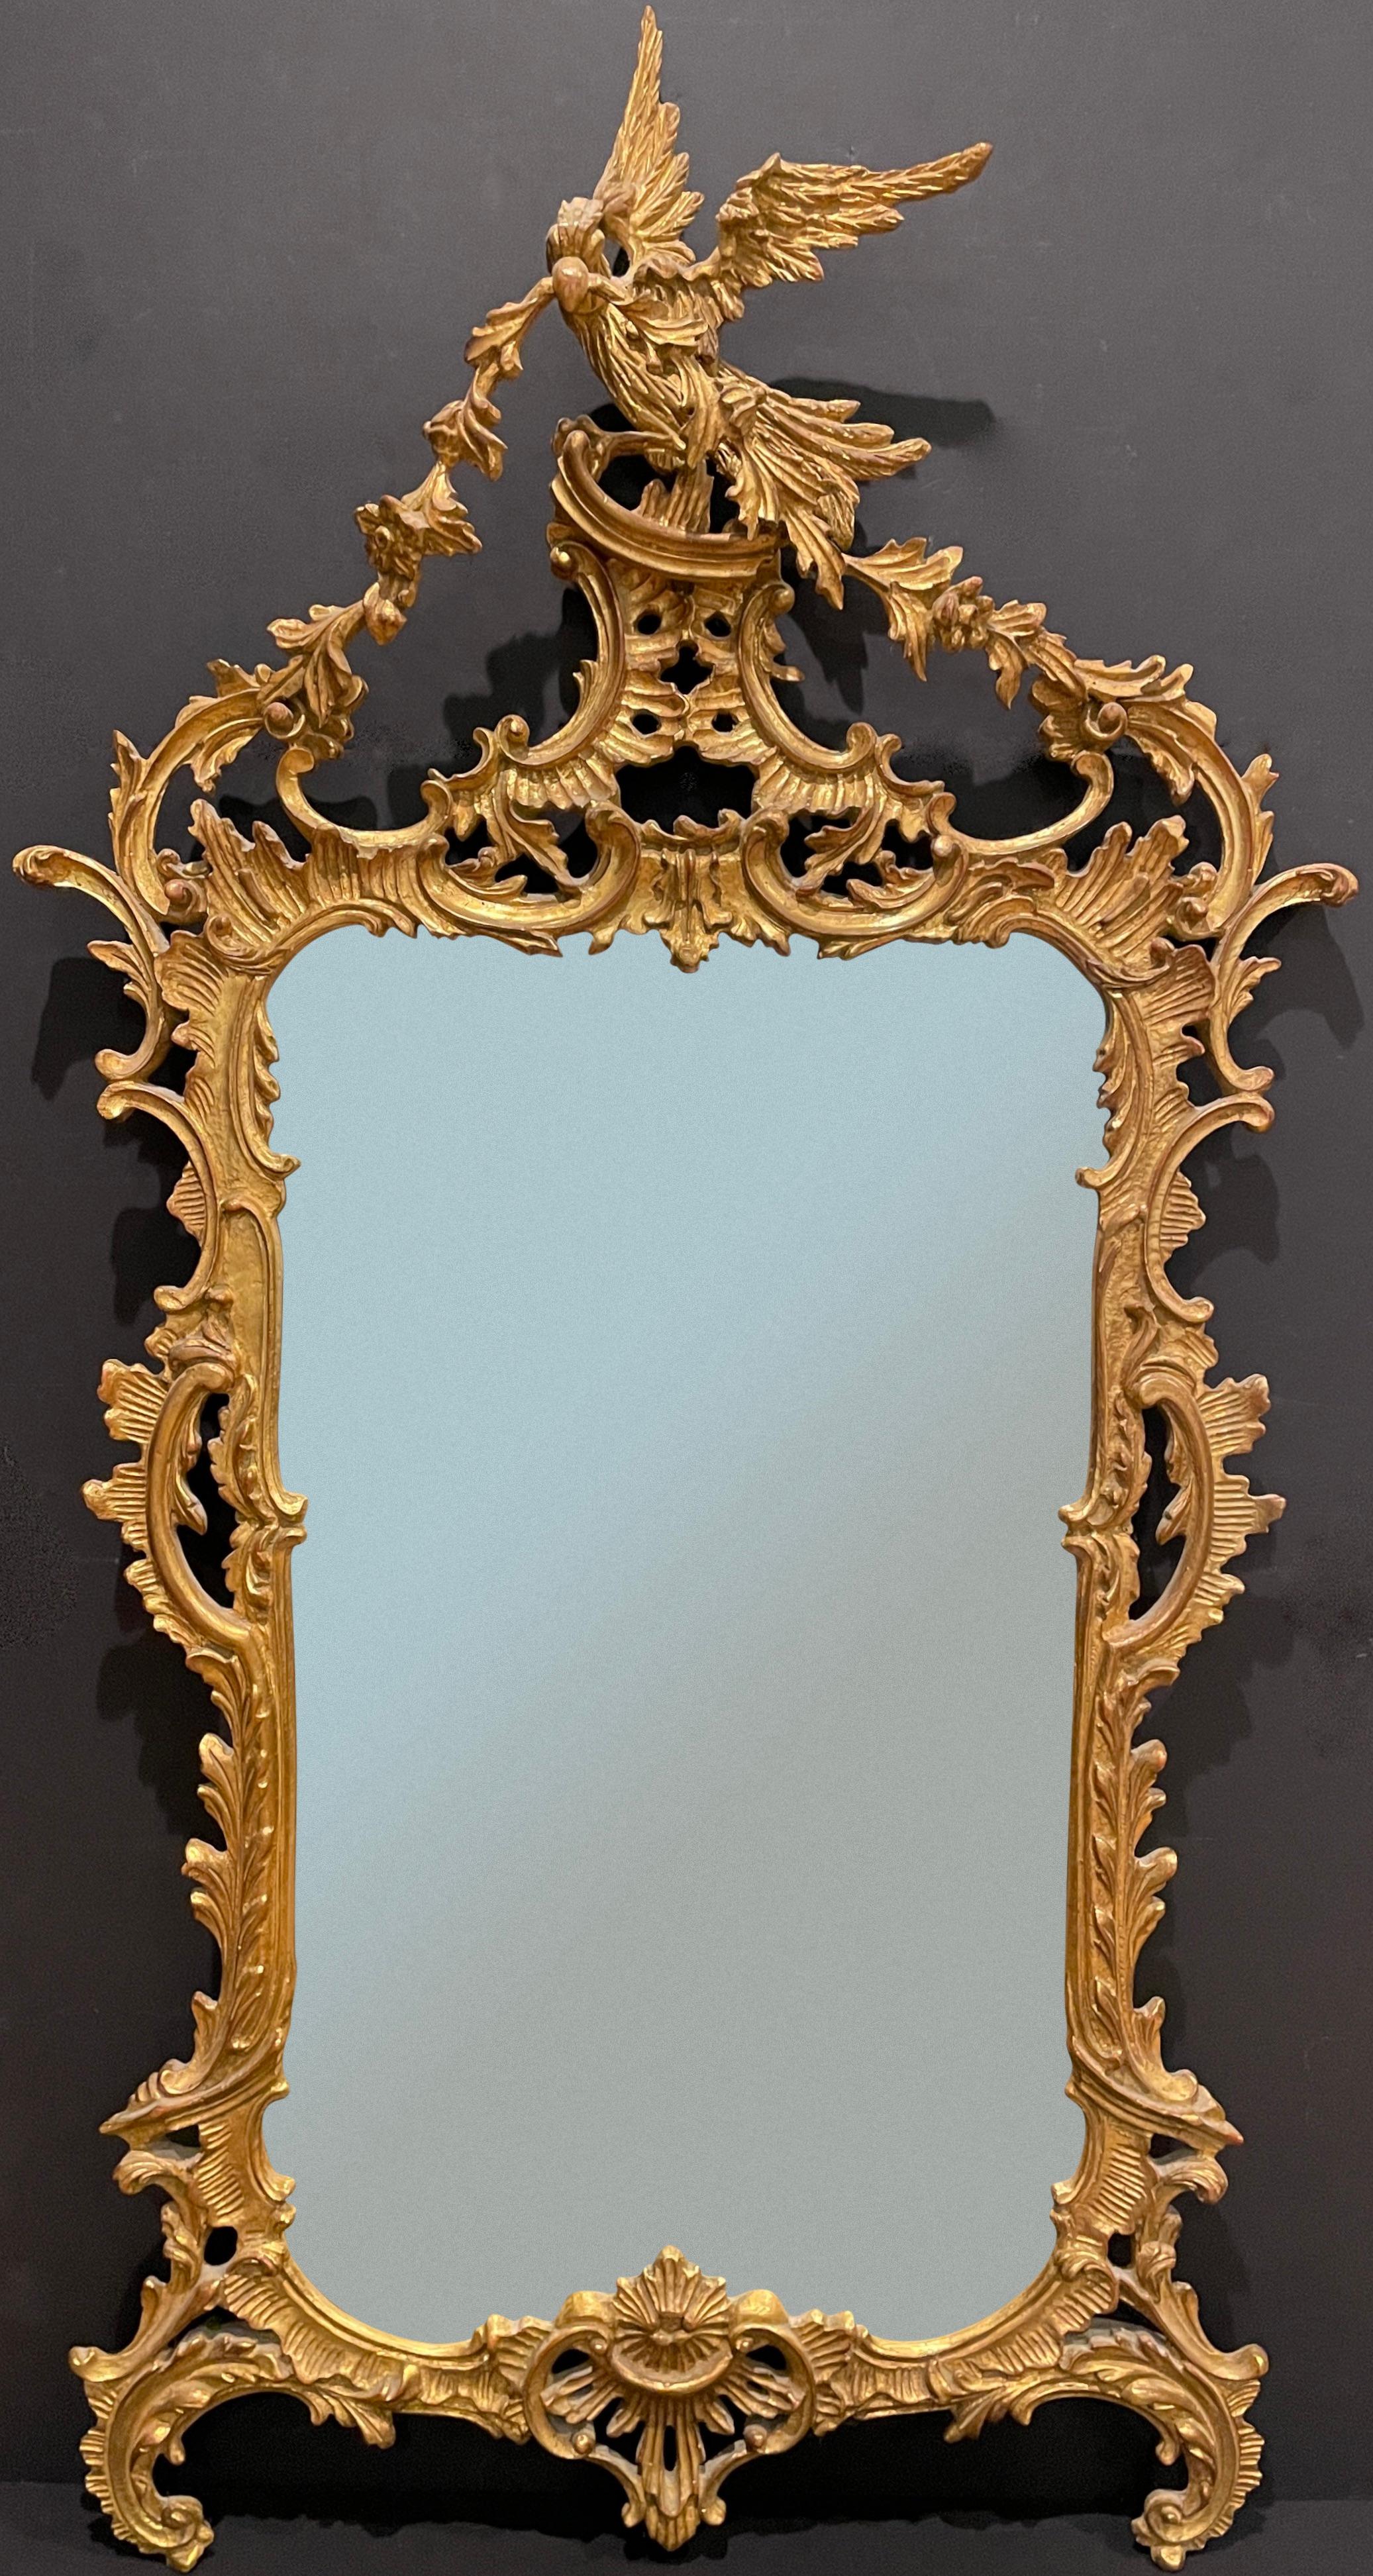 Gilt and carved wood Chinese Chippendale beveled mirror. Chinoiserie style giltwood frame with central Ho Ho bird at top.